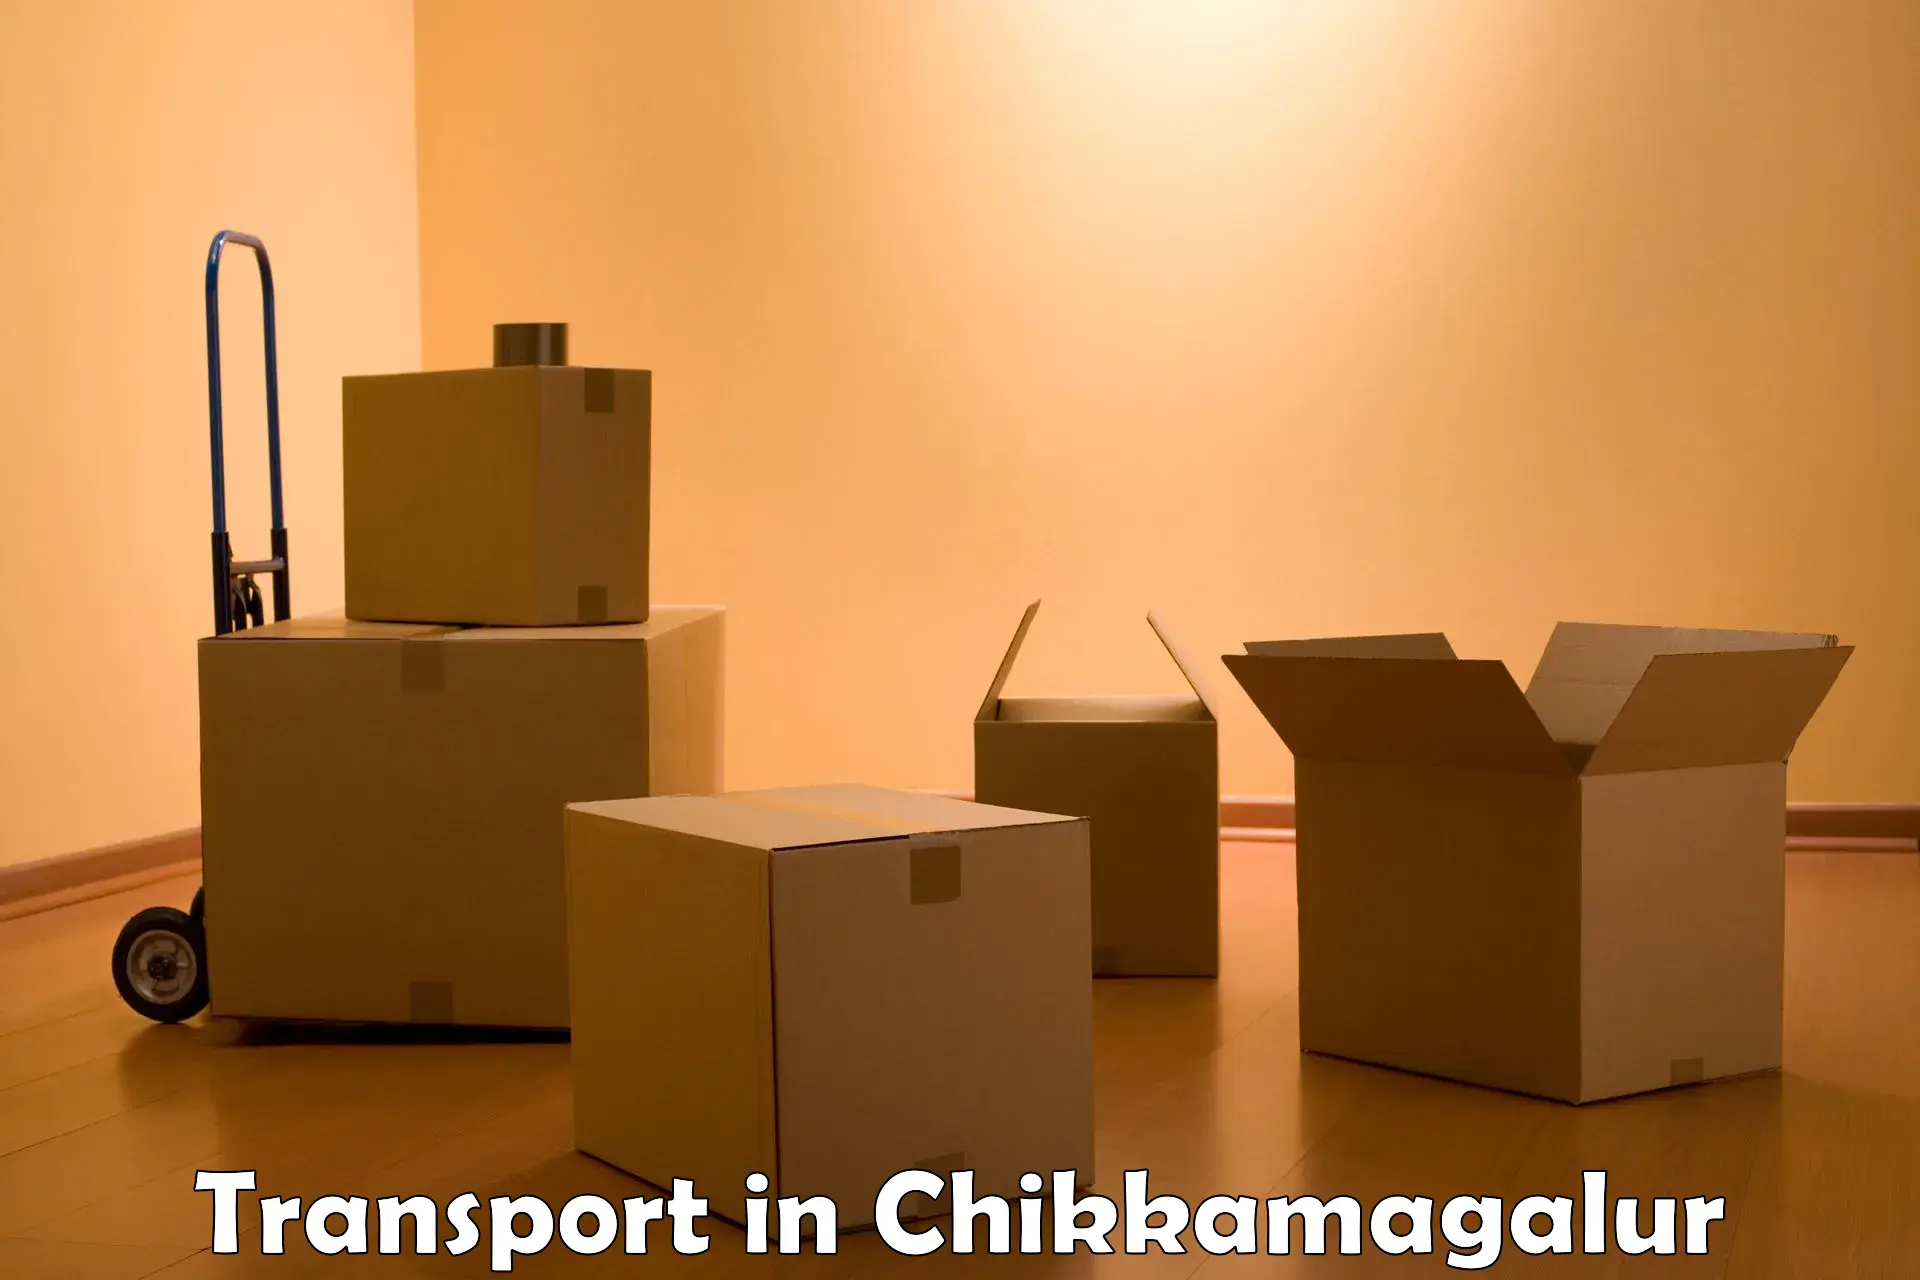 Cargo transportation services in Chikkamagalur